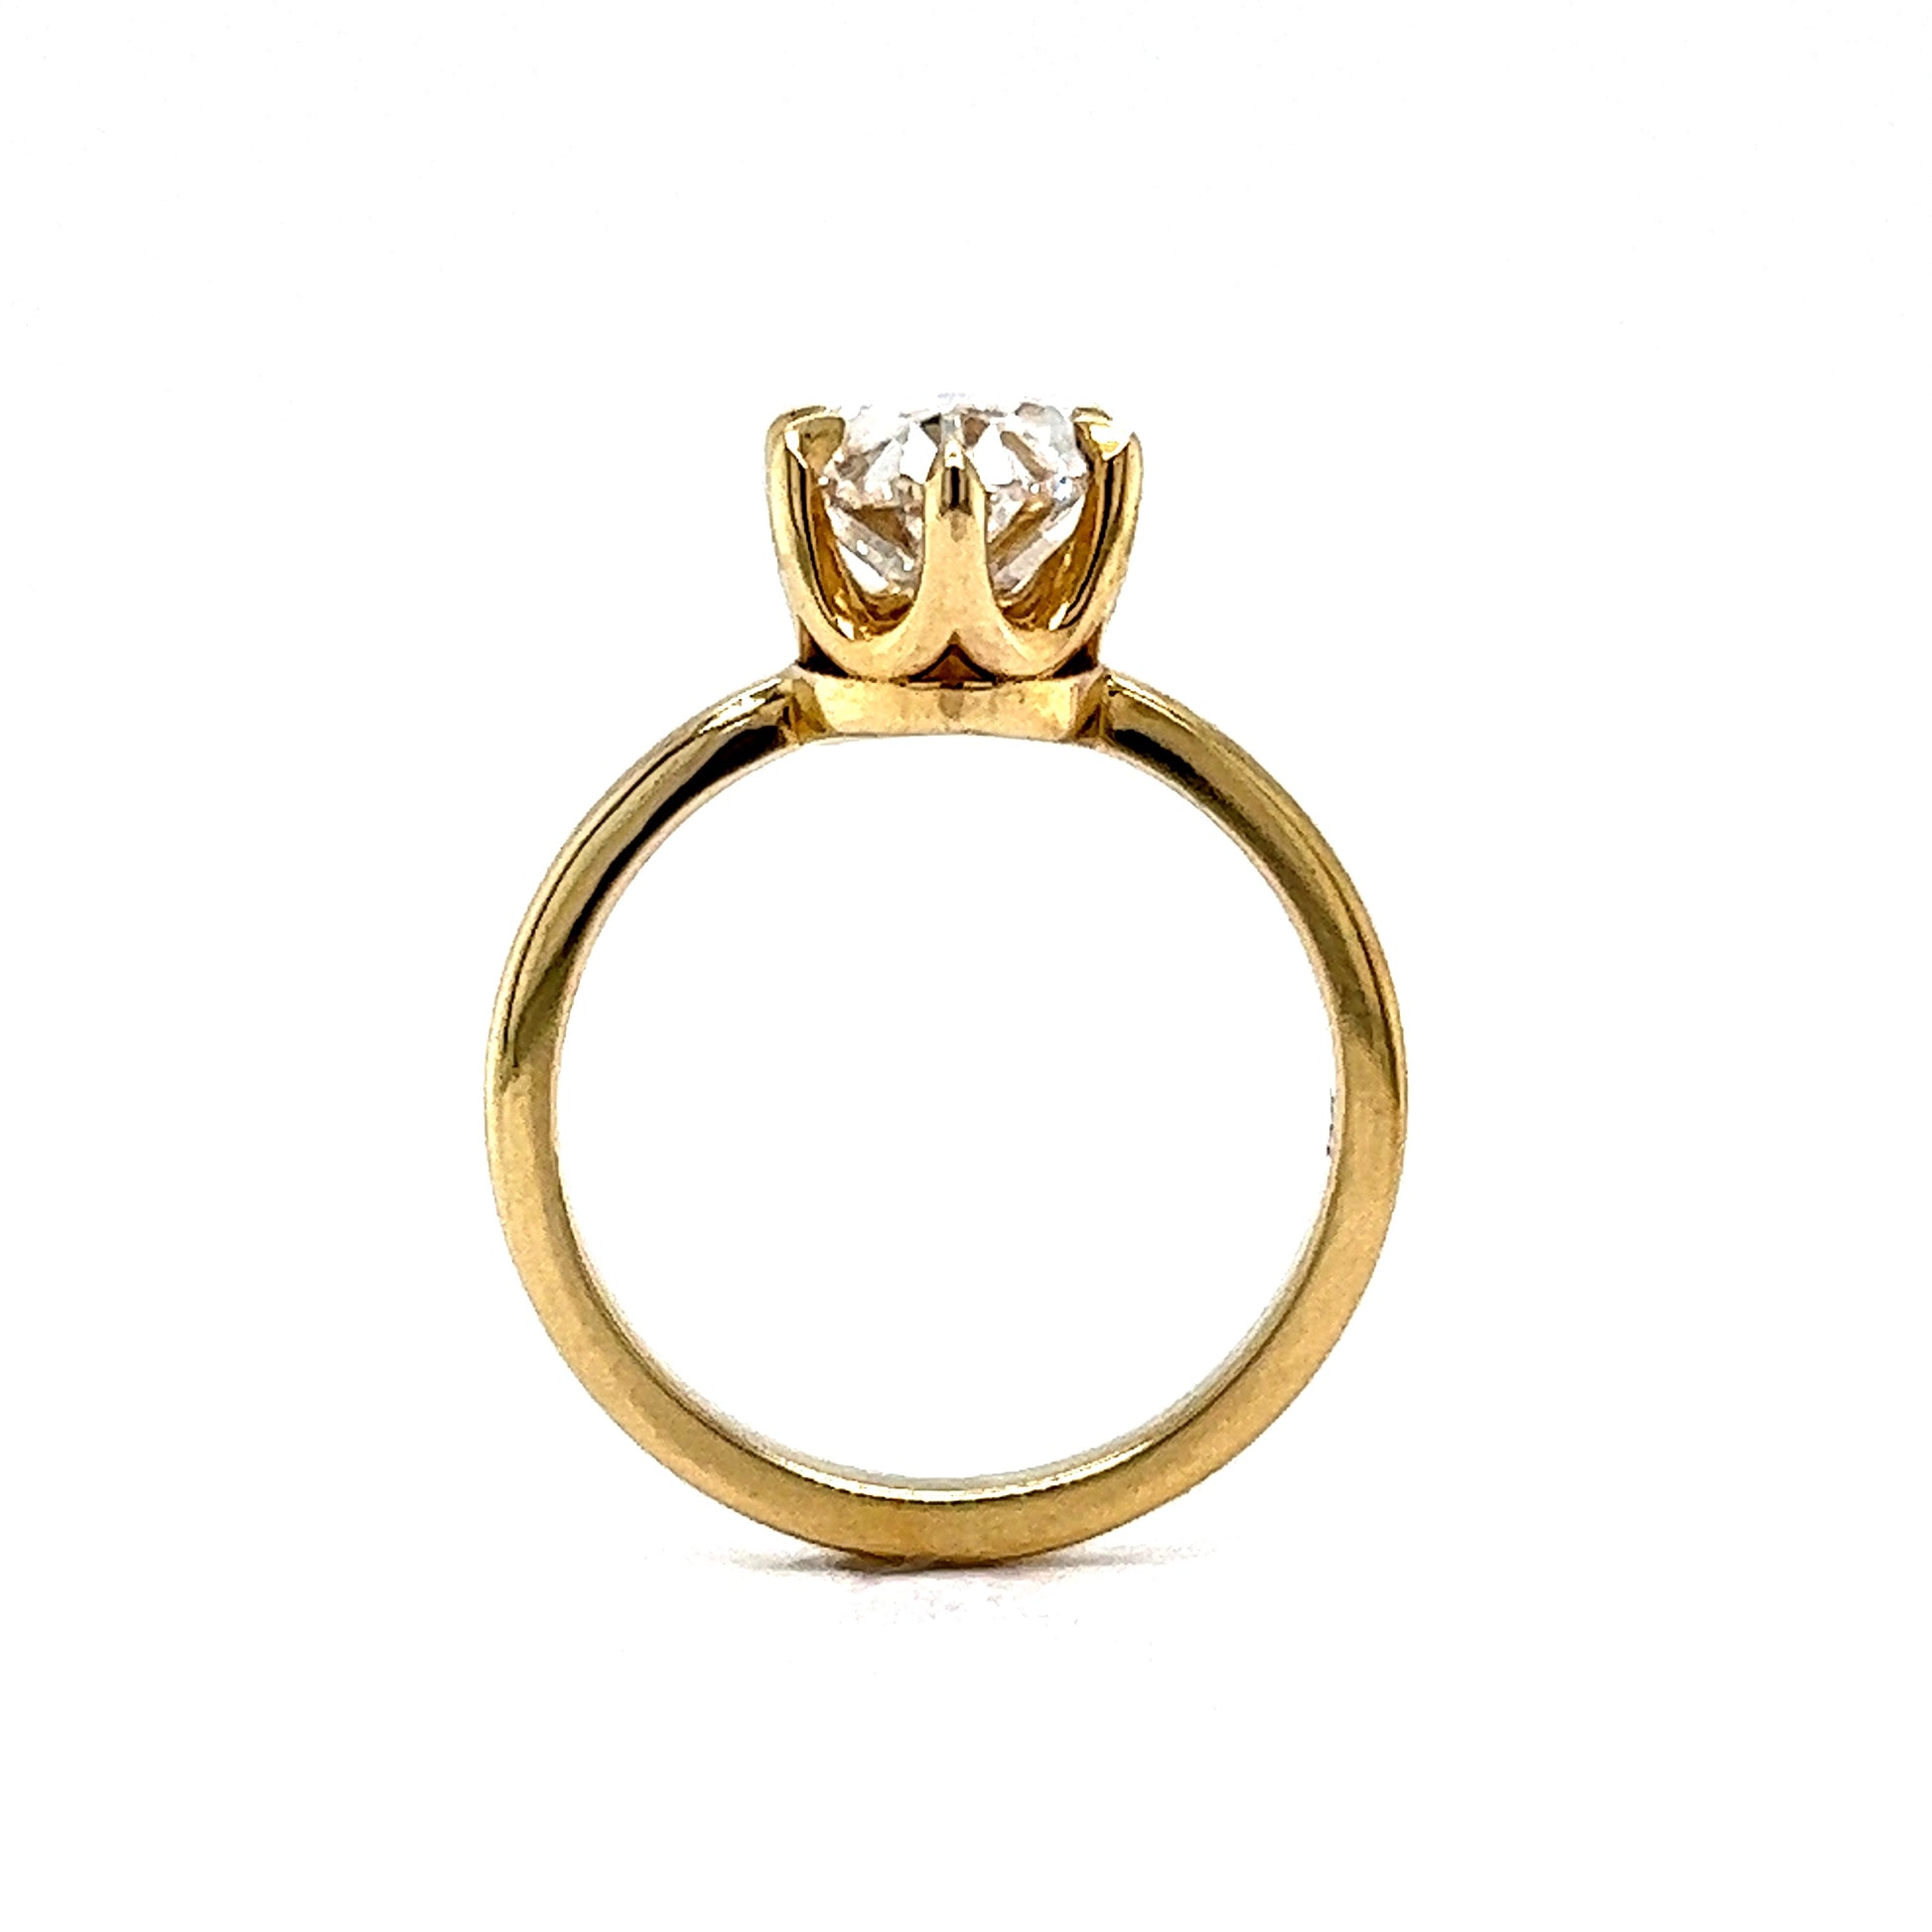 3.04 Oval Cut Diamond Engagement Ring in 14k Yellow Gold